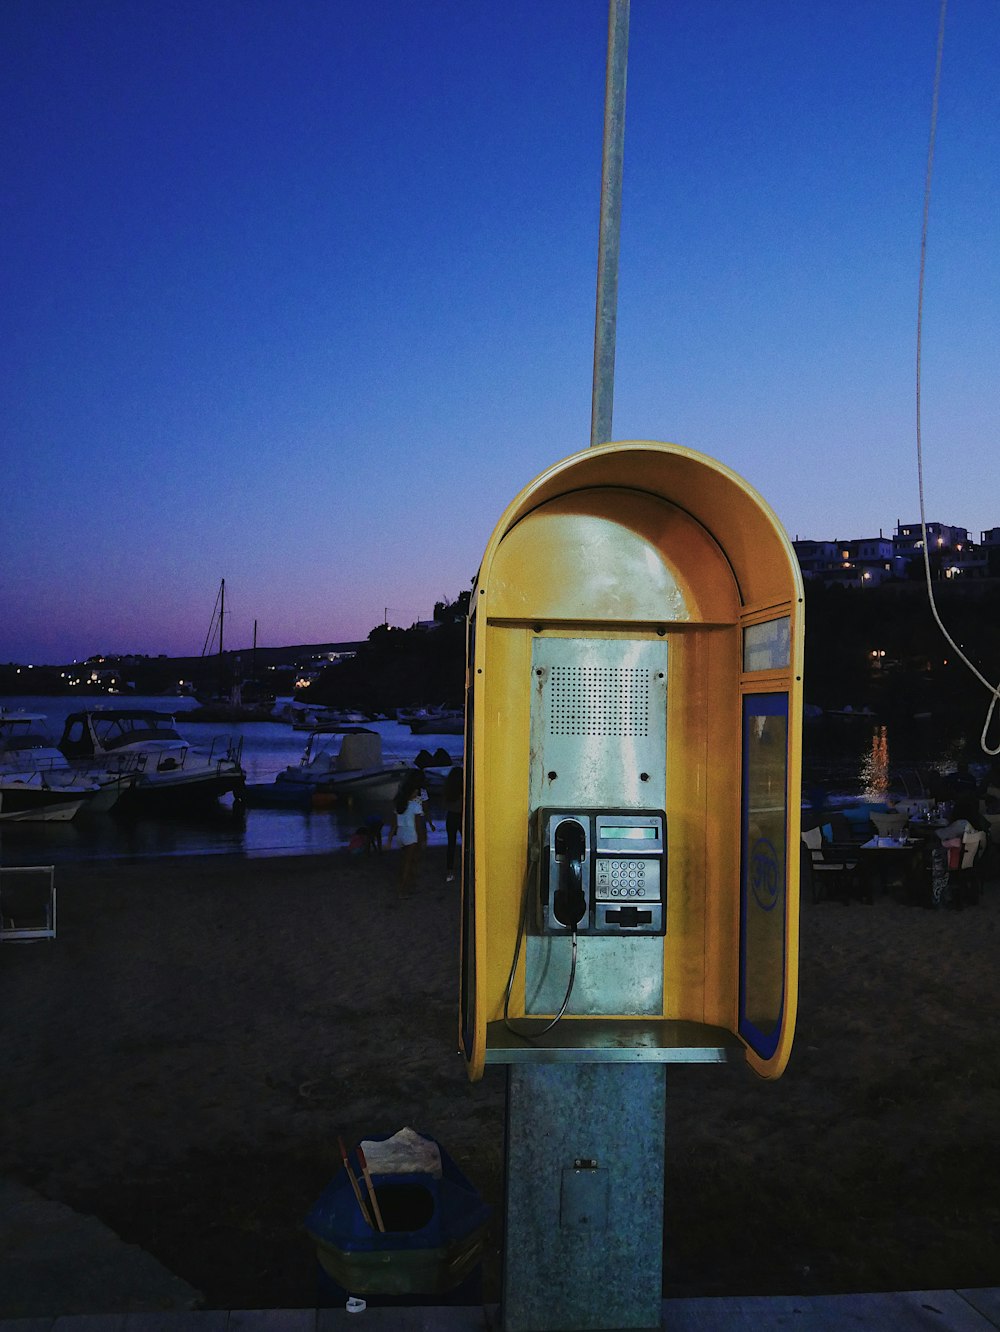 yellow and silver telephone booth